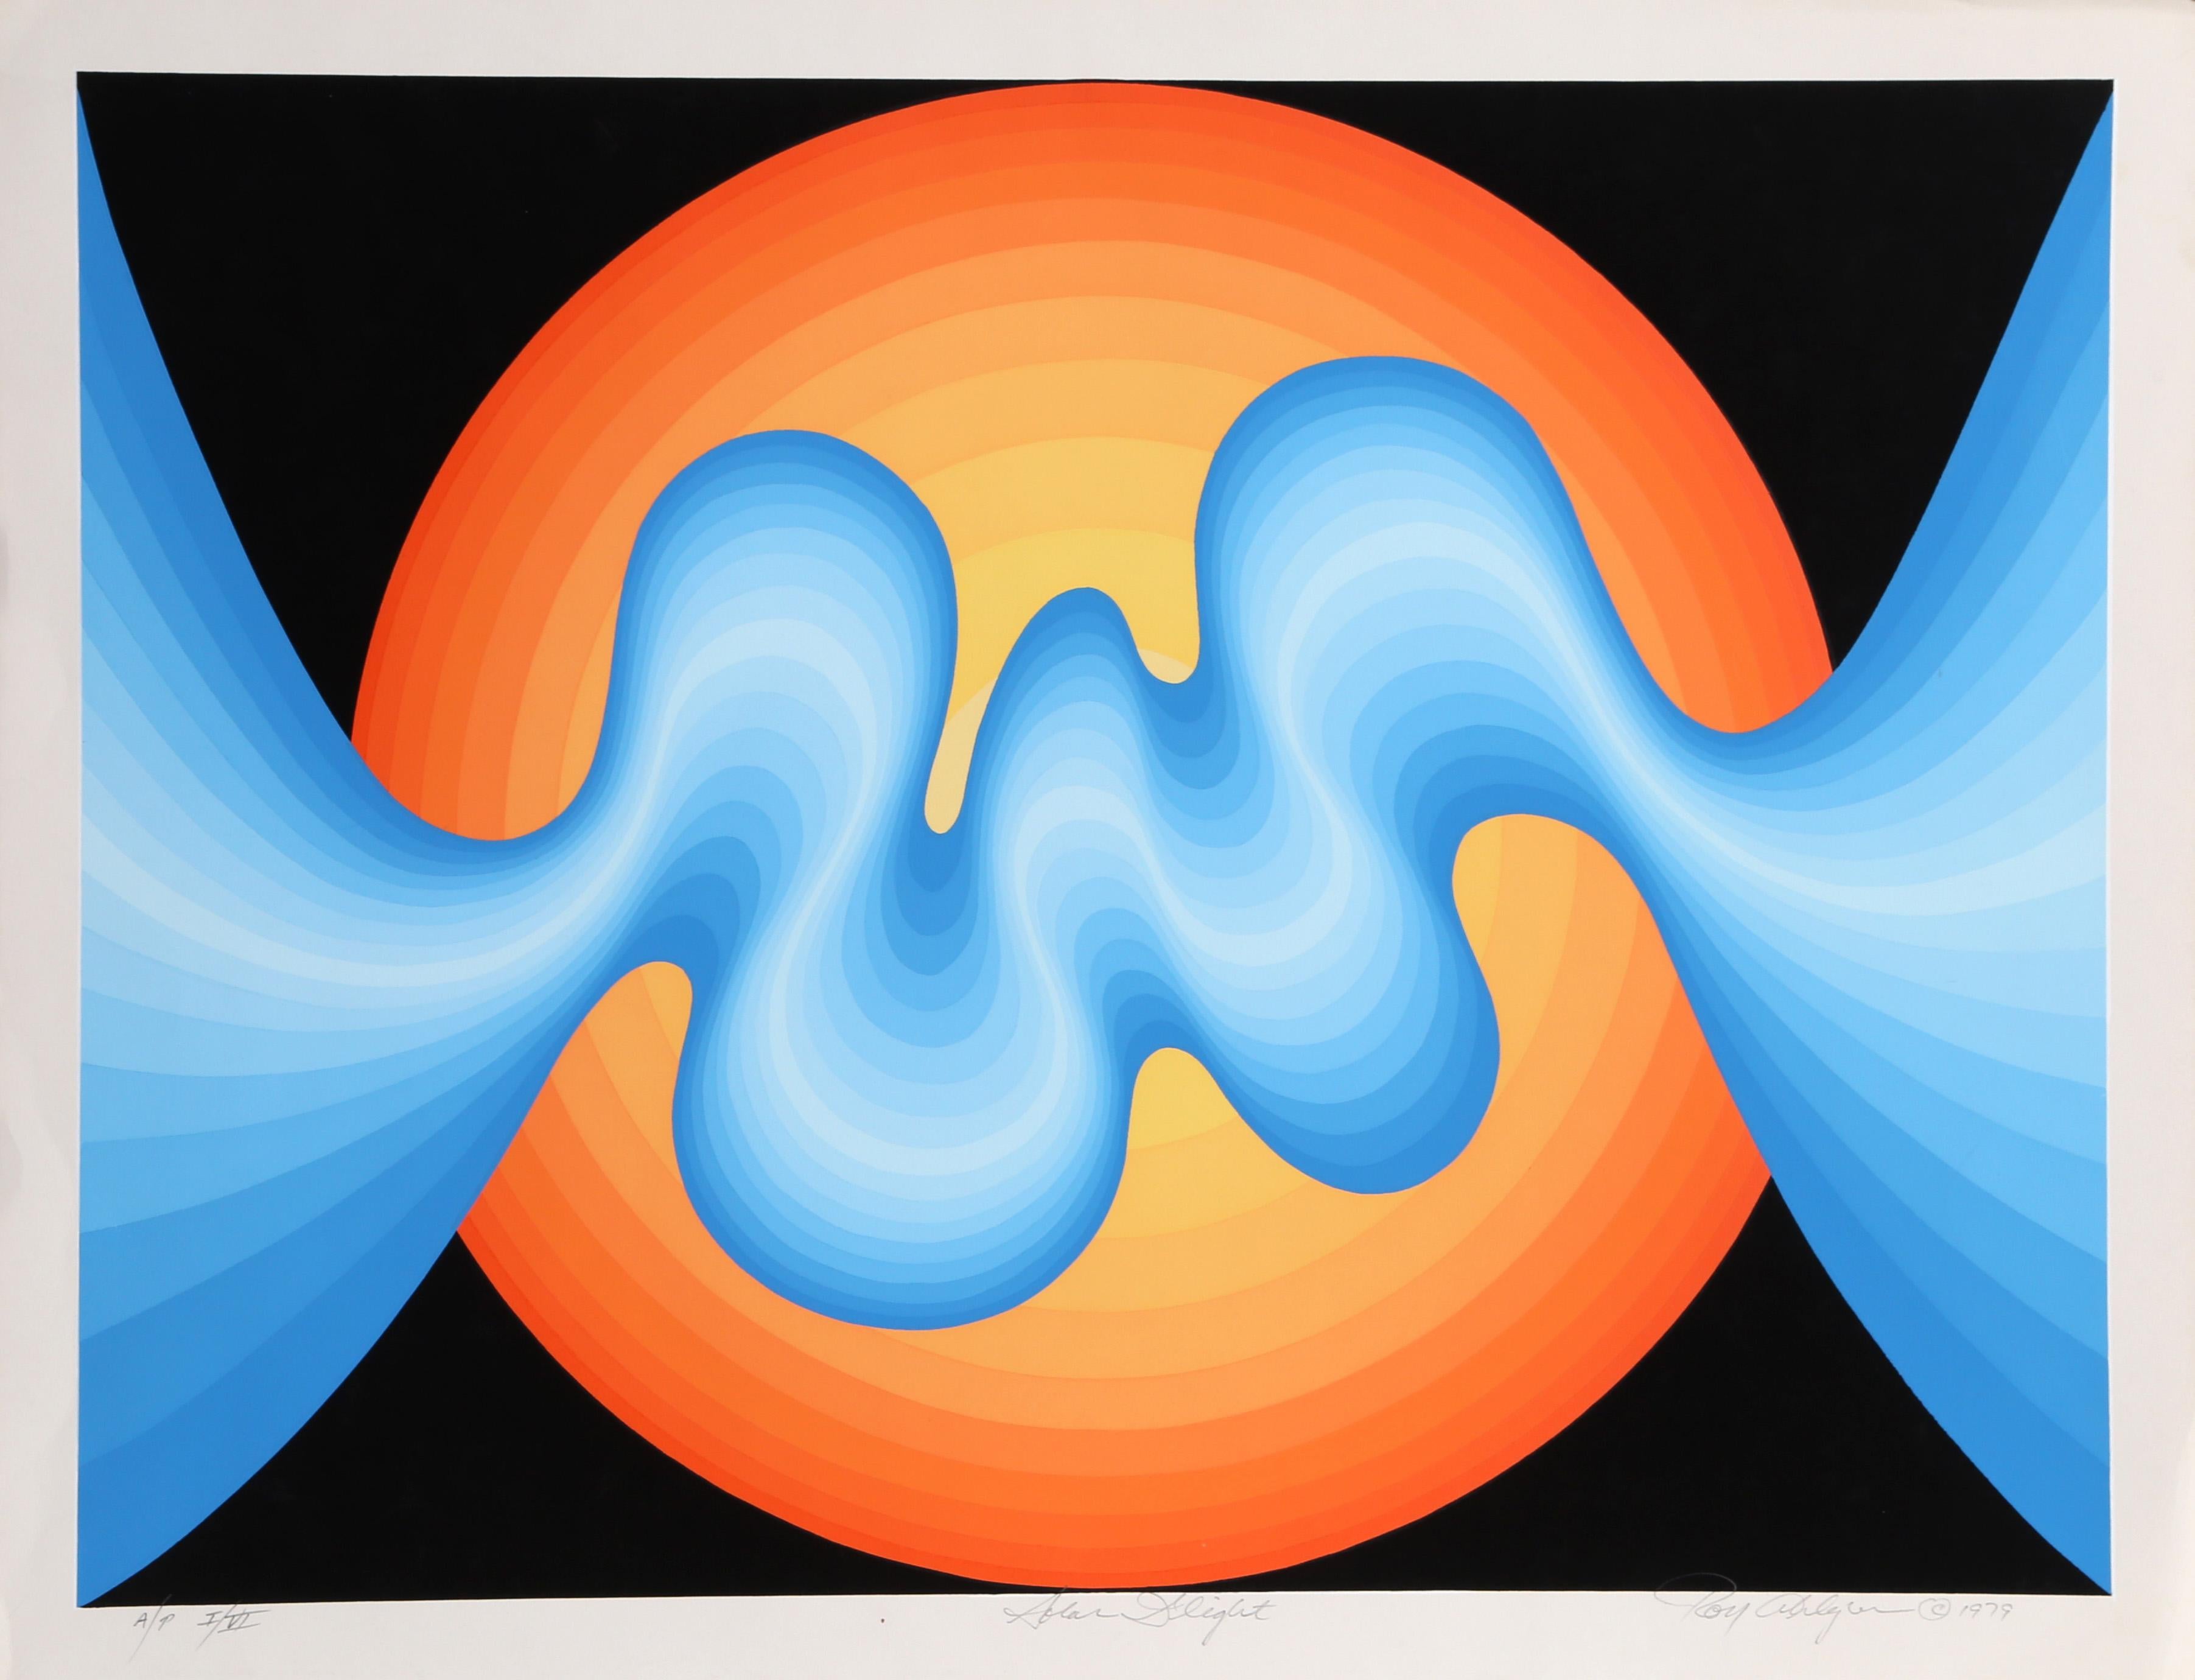 Artist: Roy Ahlgren, American (1927 - 2011)
Title: Solar D'Light
Year: 1979
Medium: Silkscreen, signed and numbered in pencil
Edition: AP VI
Image Size: 18 x 24 inches
Size: 20 x 26 in. (50.8 x 66.04 cm)